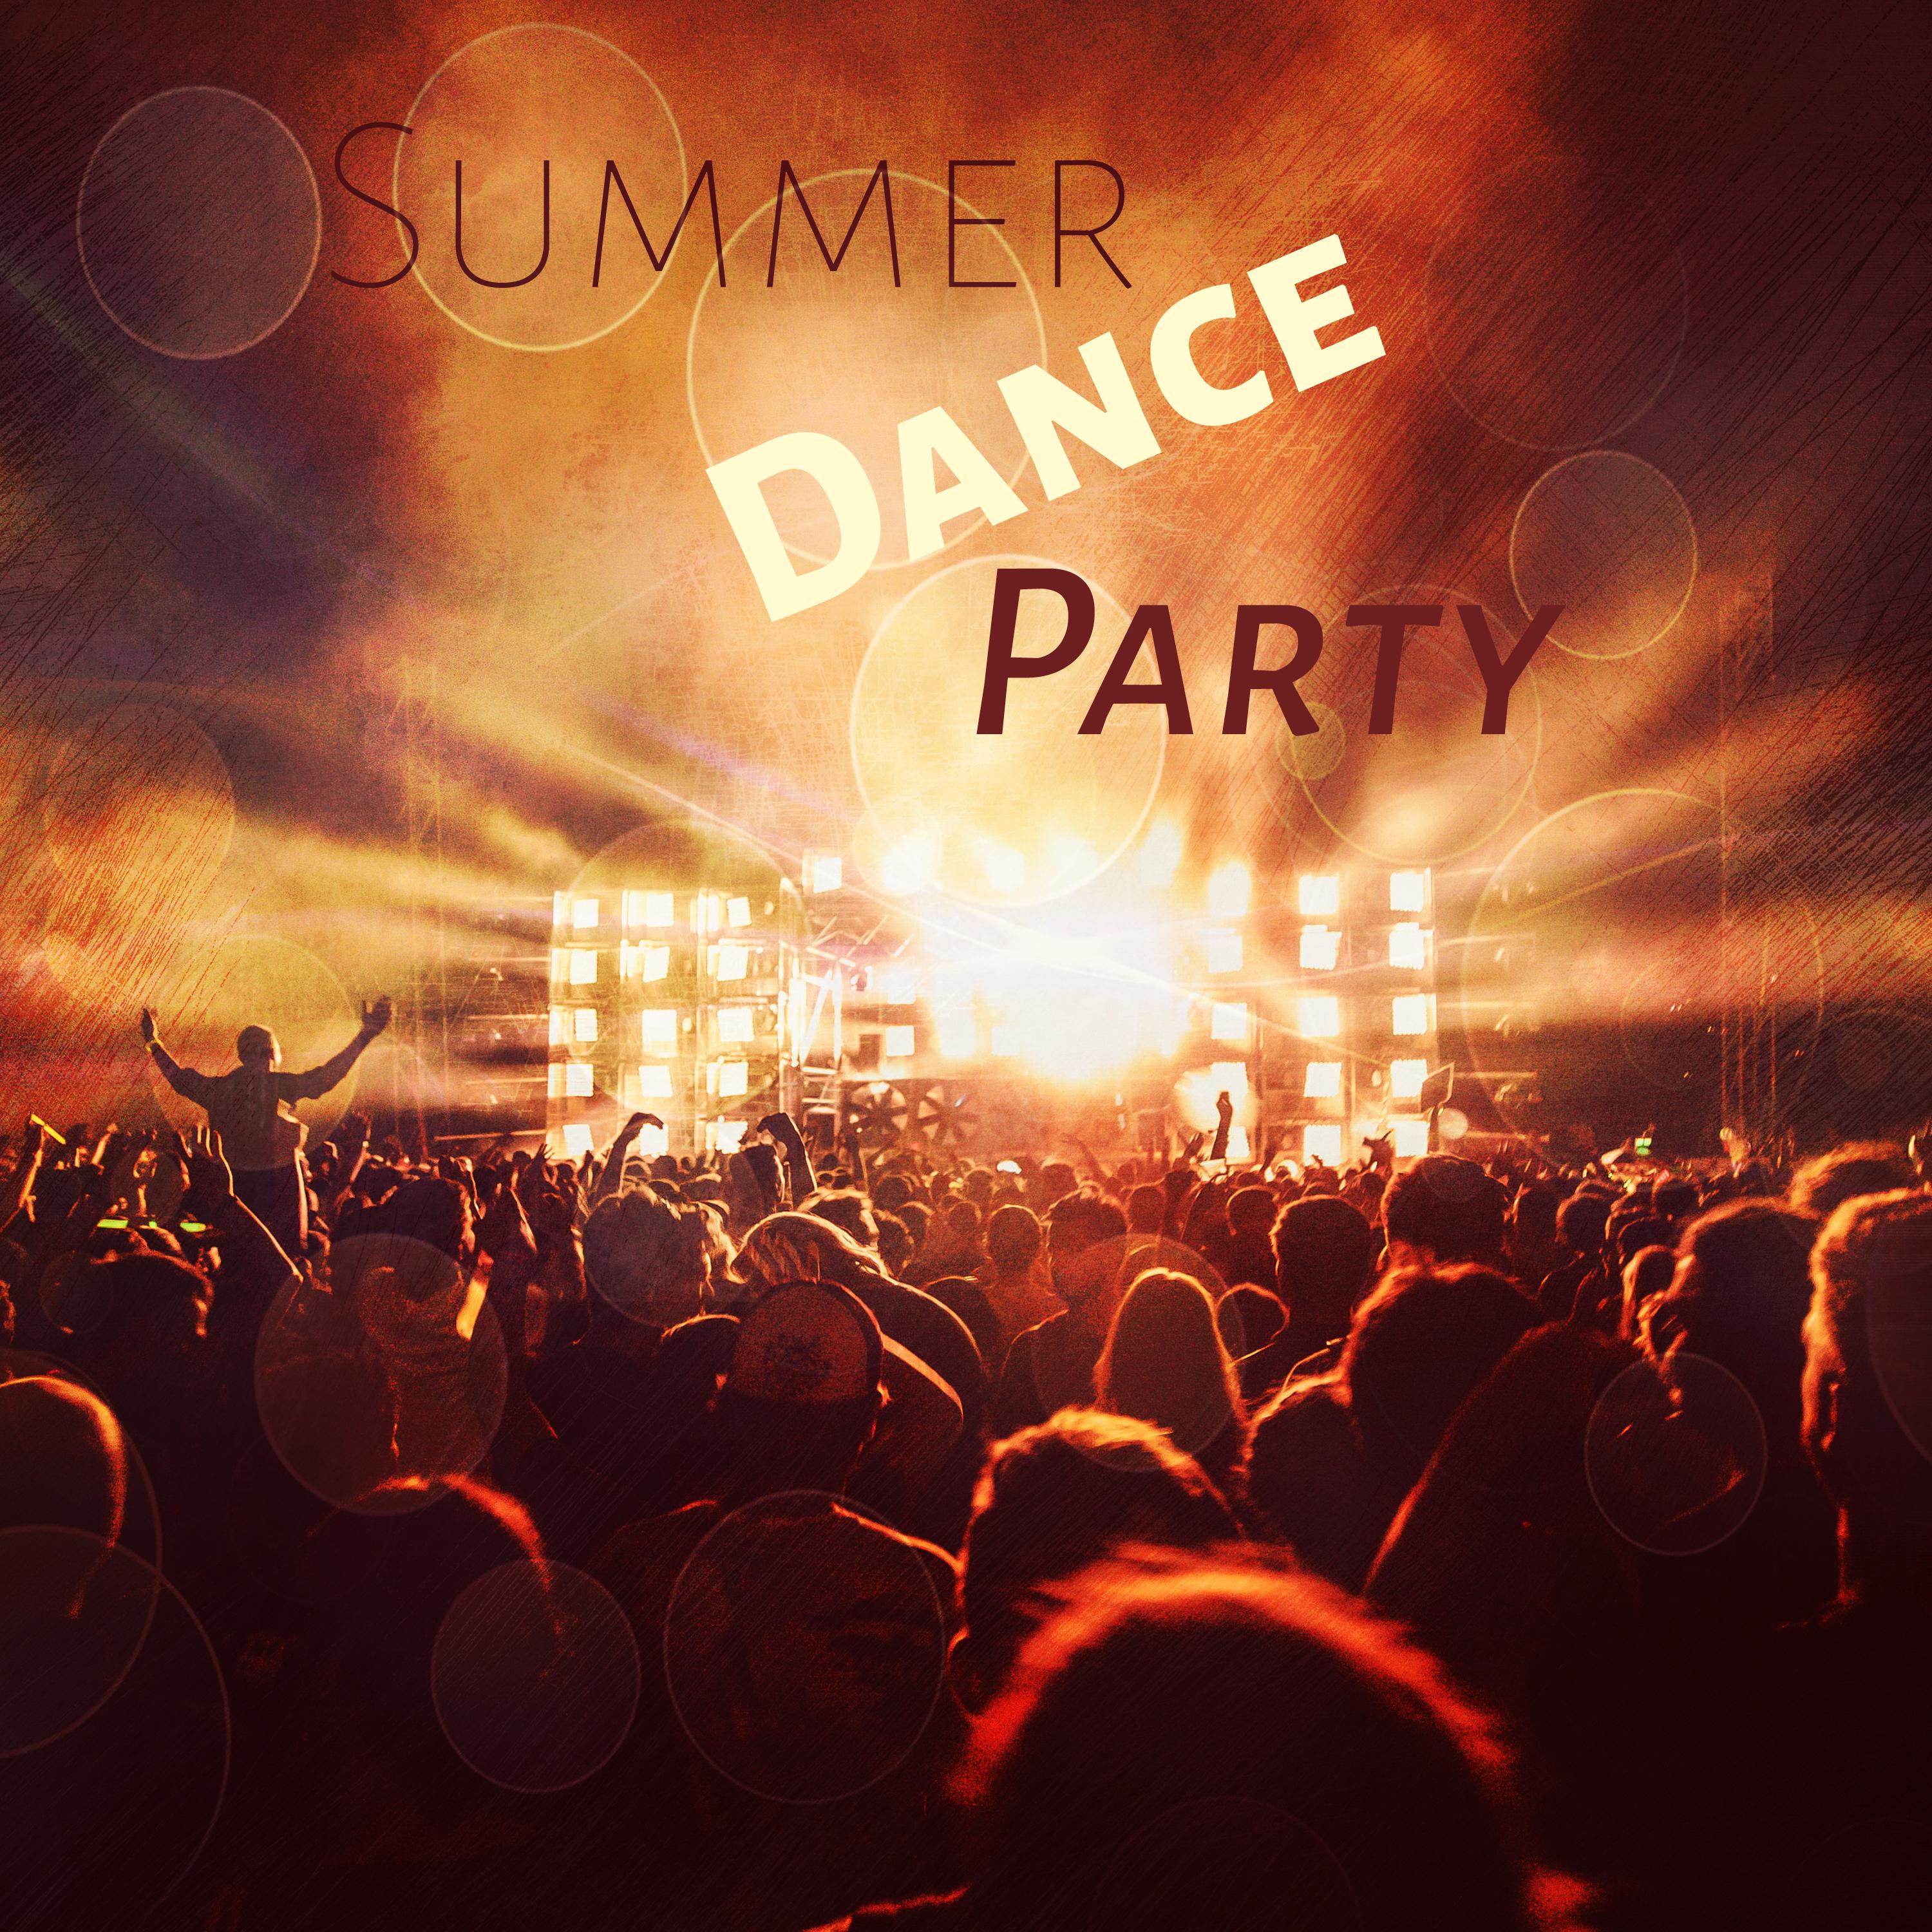 Summer Dance Party – Best Chill Out Music, Beach Bar, Drinks & Cocktails, Ibiza Vibes